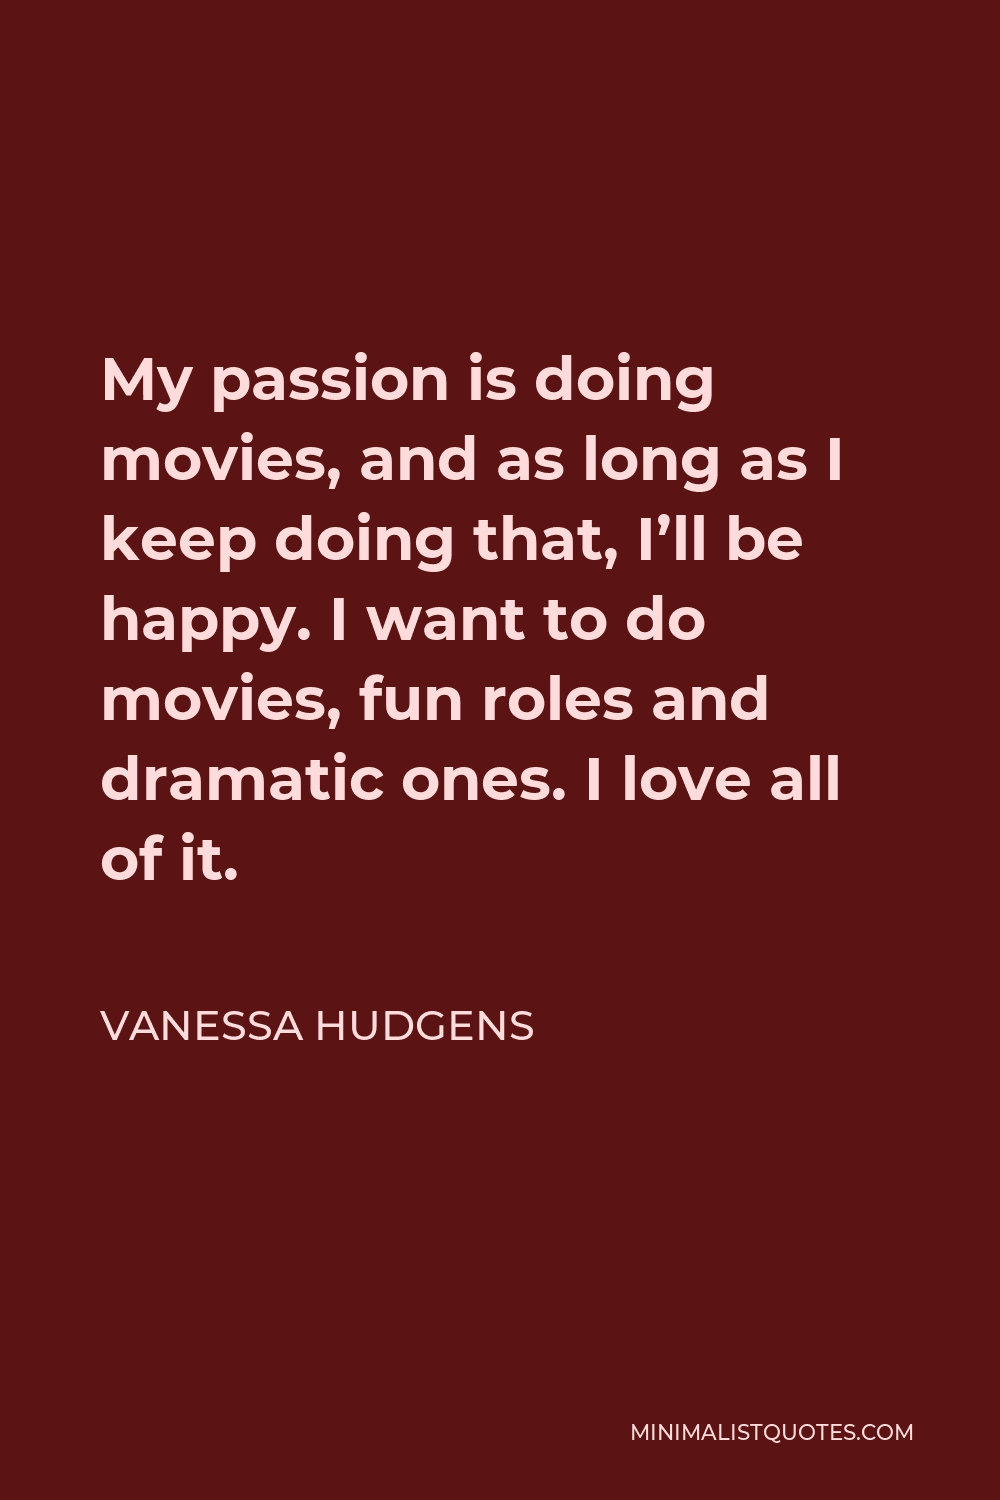 Vanessa Hudgens Quote - My passion is doing movies, and as long as I keep doing that, I’ll be happy. I want to do movies, fun roles and dramatic ones. I love all of it.